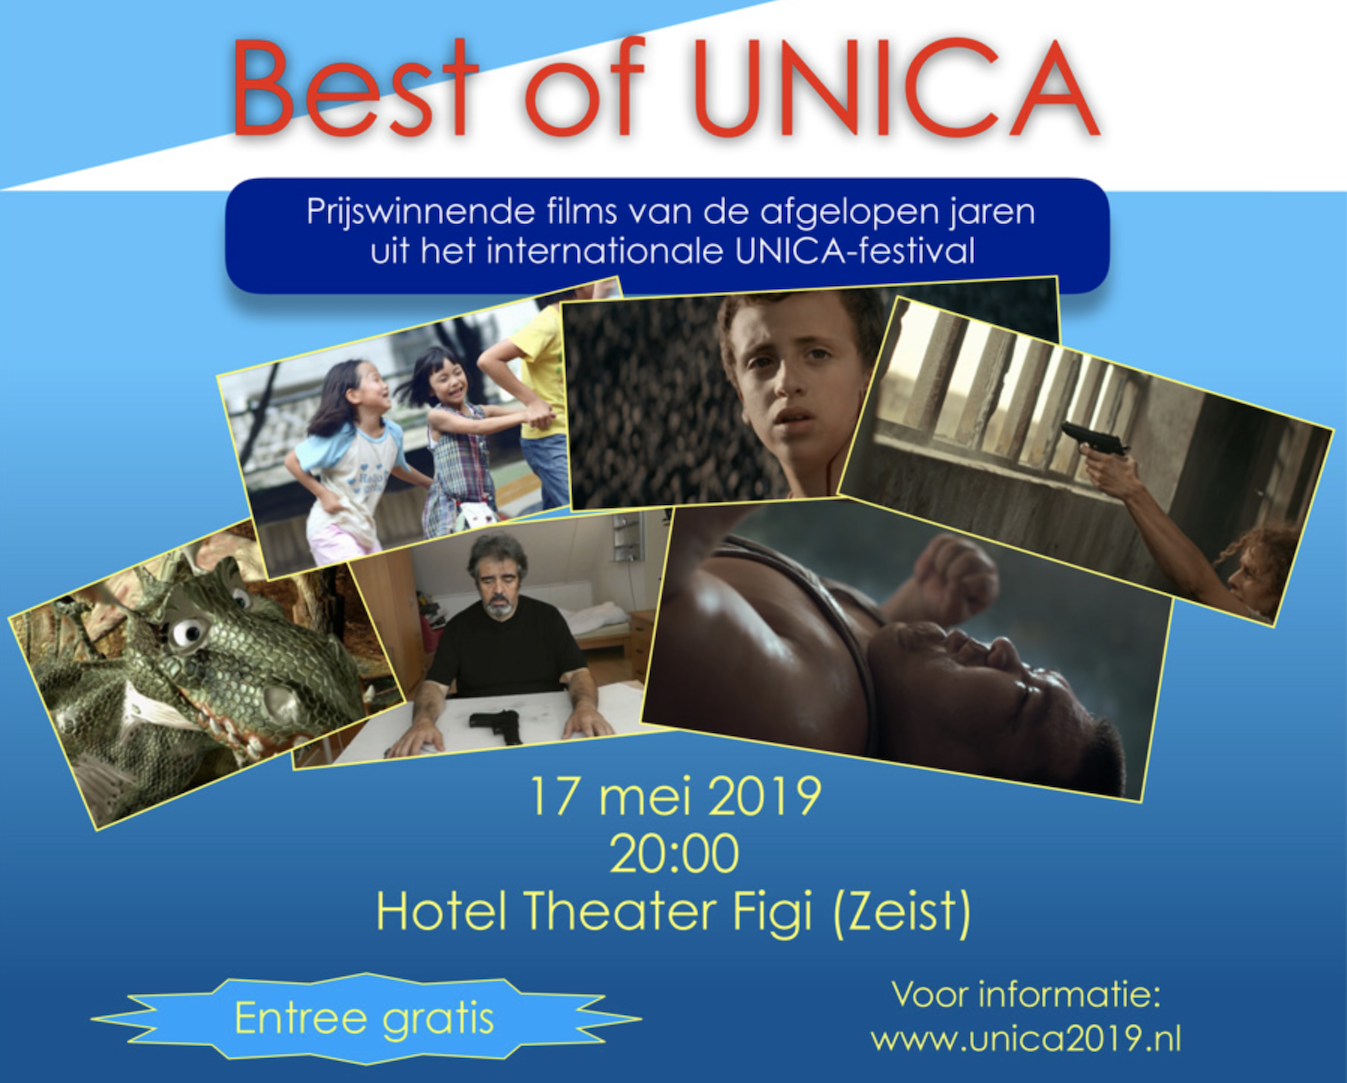 The Best of Unica